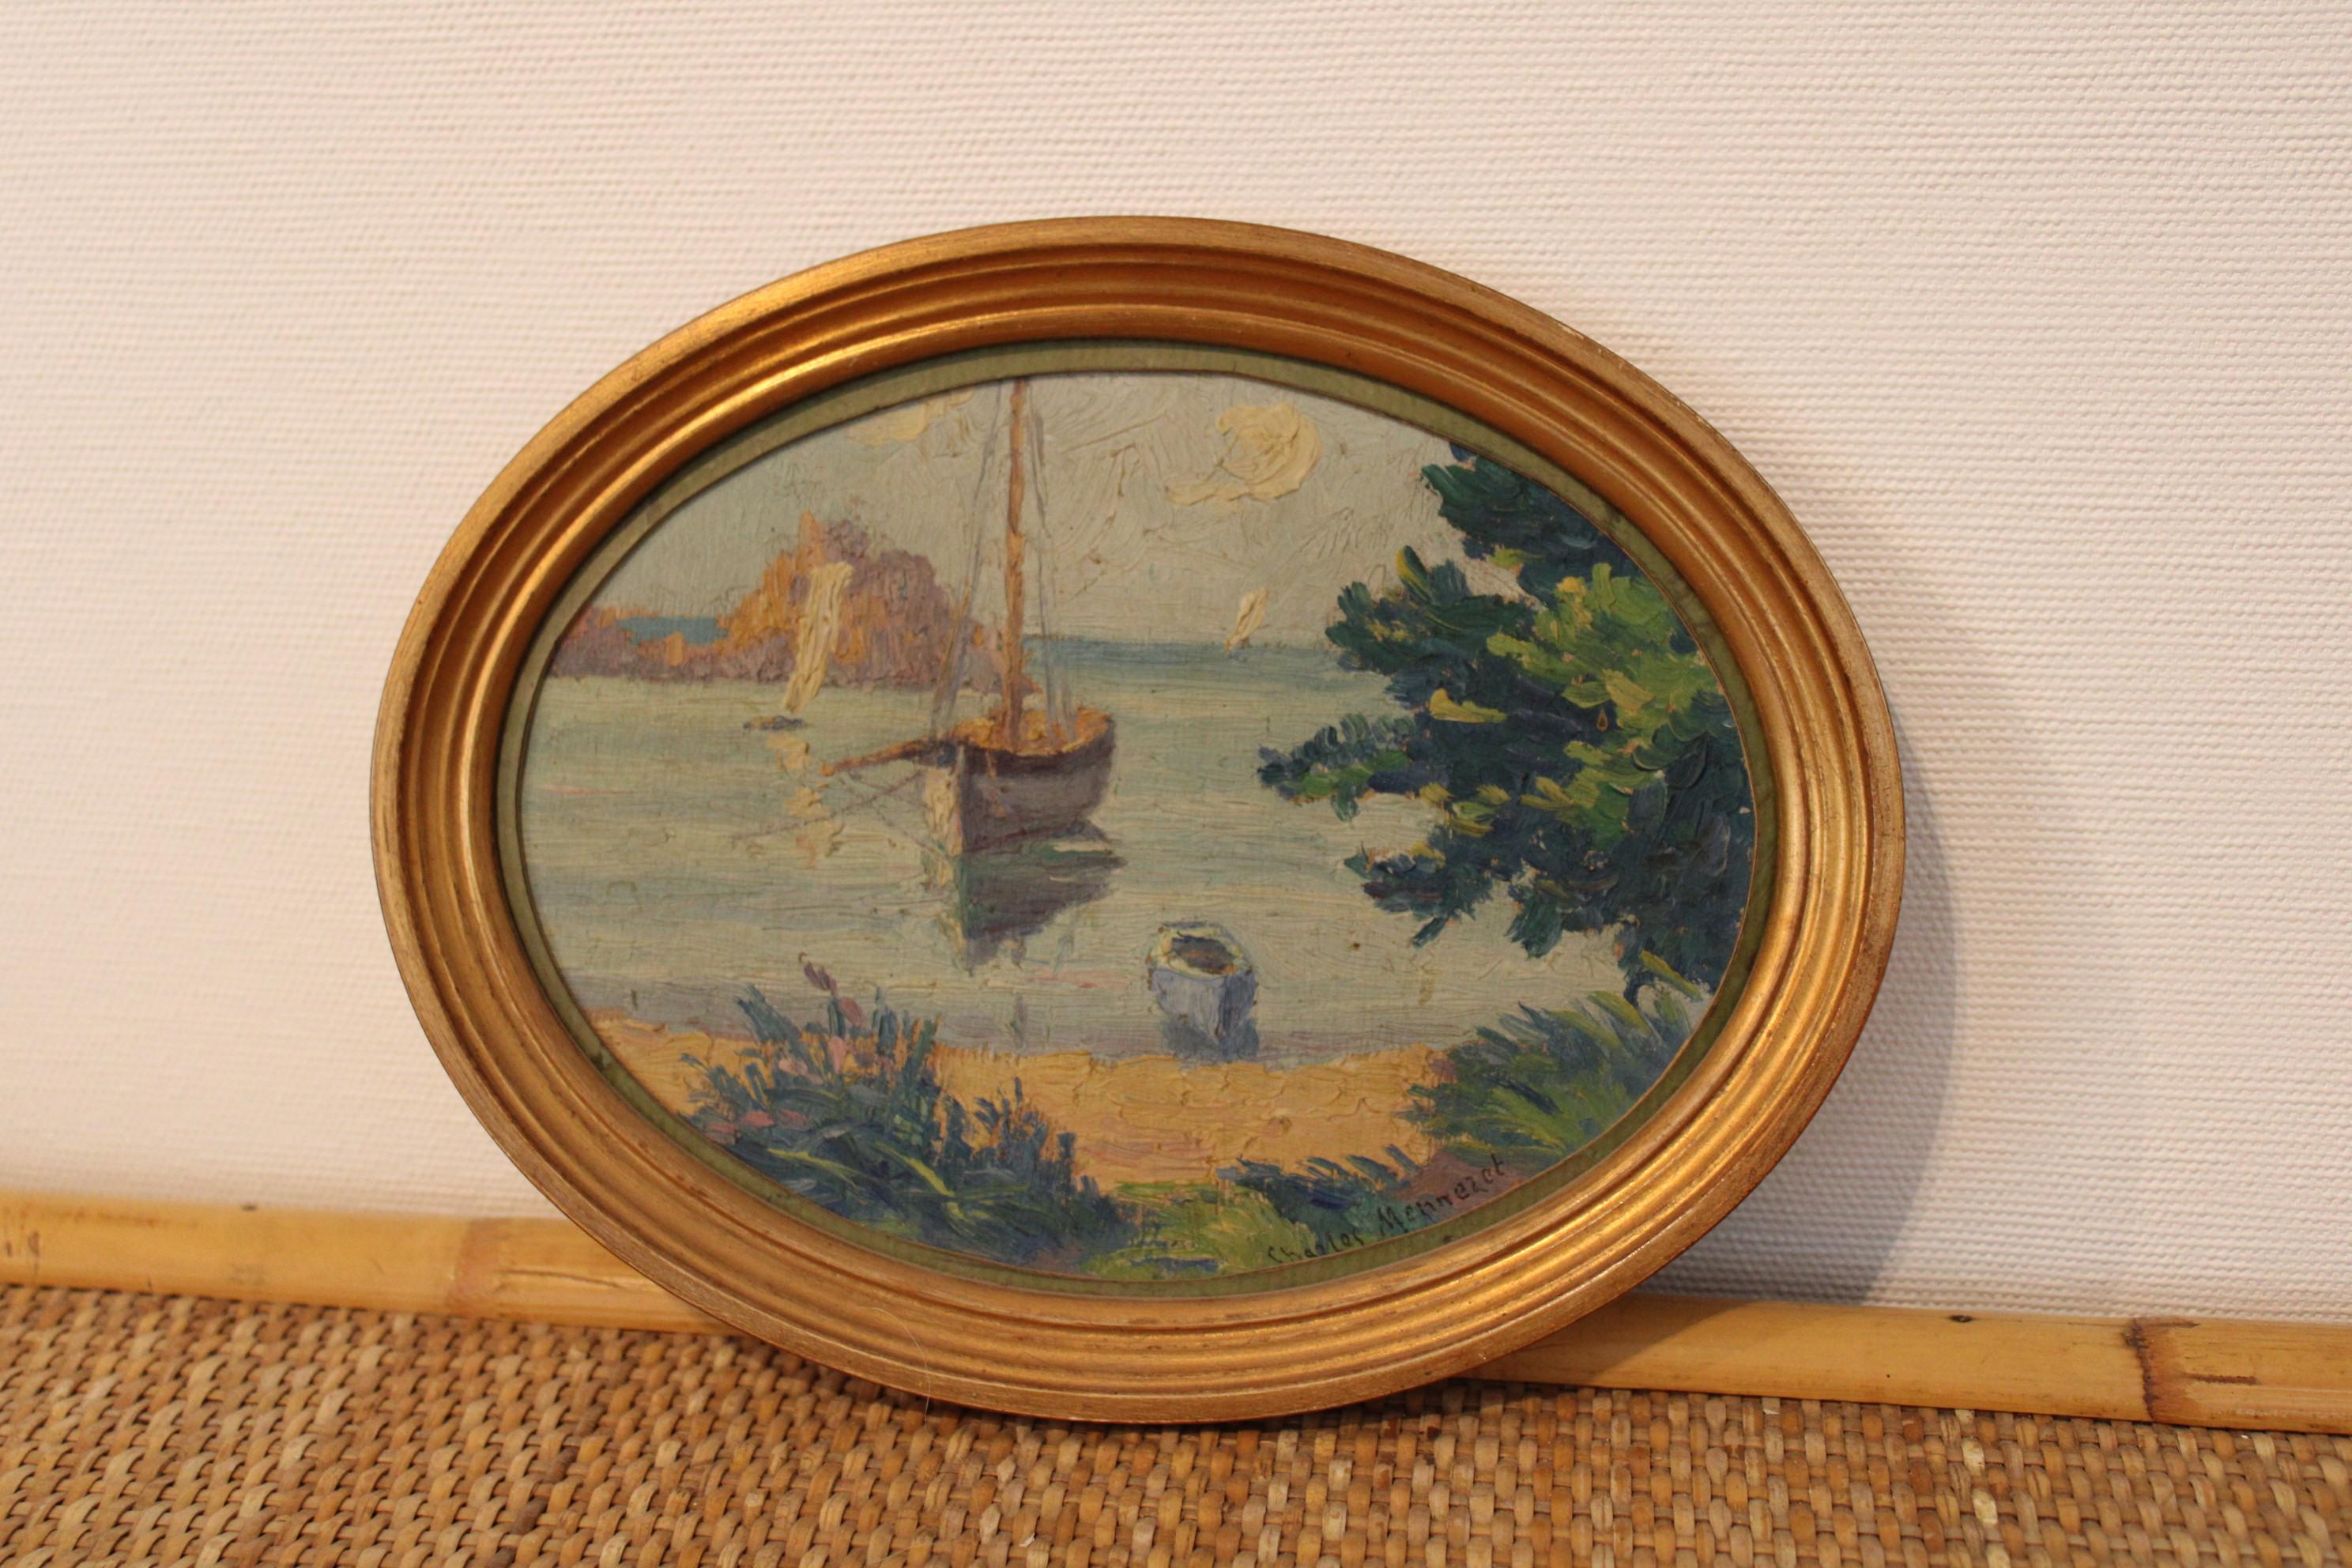 Painting by Charles Menneret (1876-1946)
Represents a French landscape, in Bretagne region
Signed on the painting 

Dimensions with frame : 24 x 19 x 2 cm
Painting dimensions : 20 x 15 cm.
  